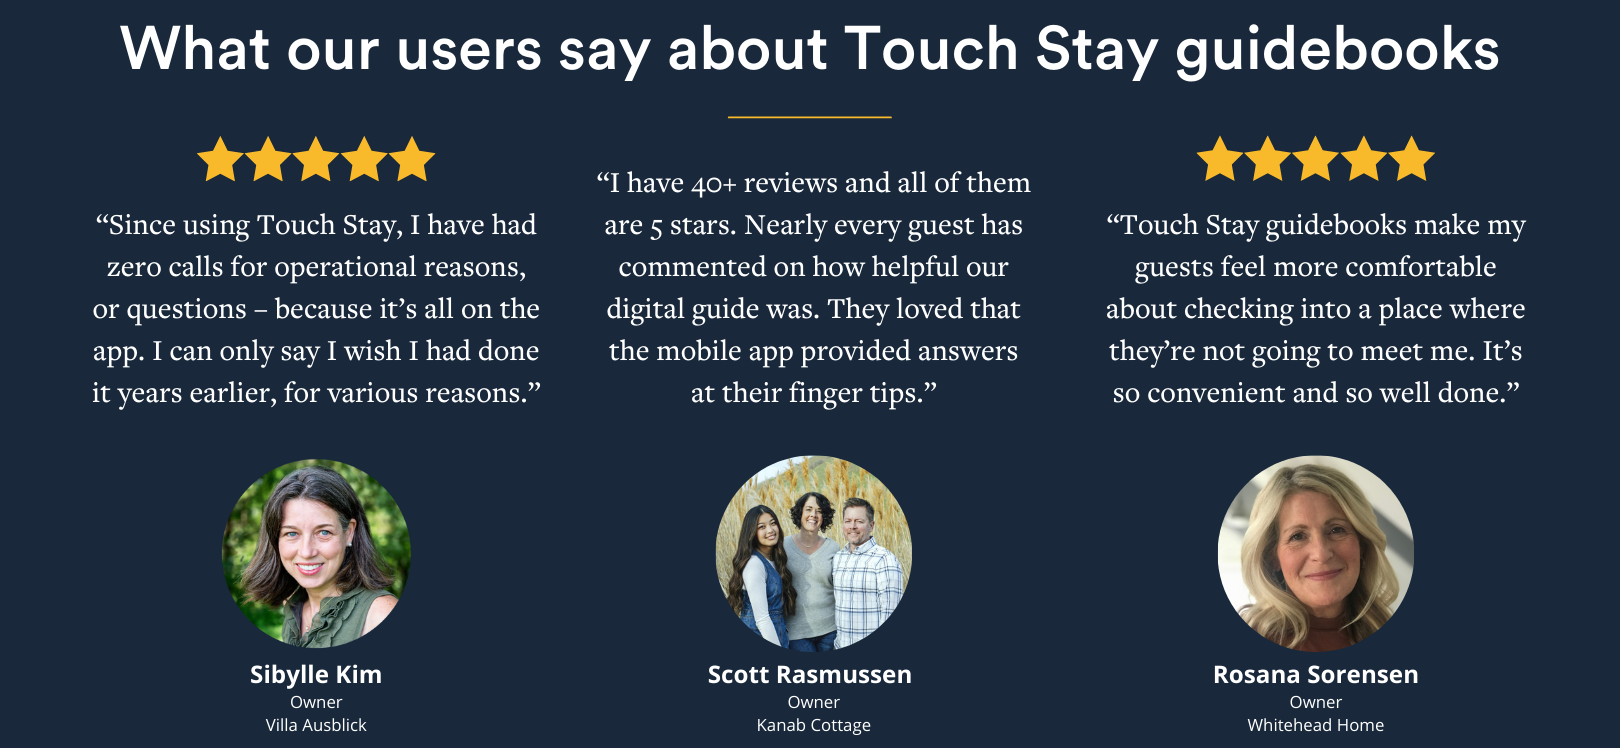 Information on Touch Stay